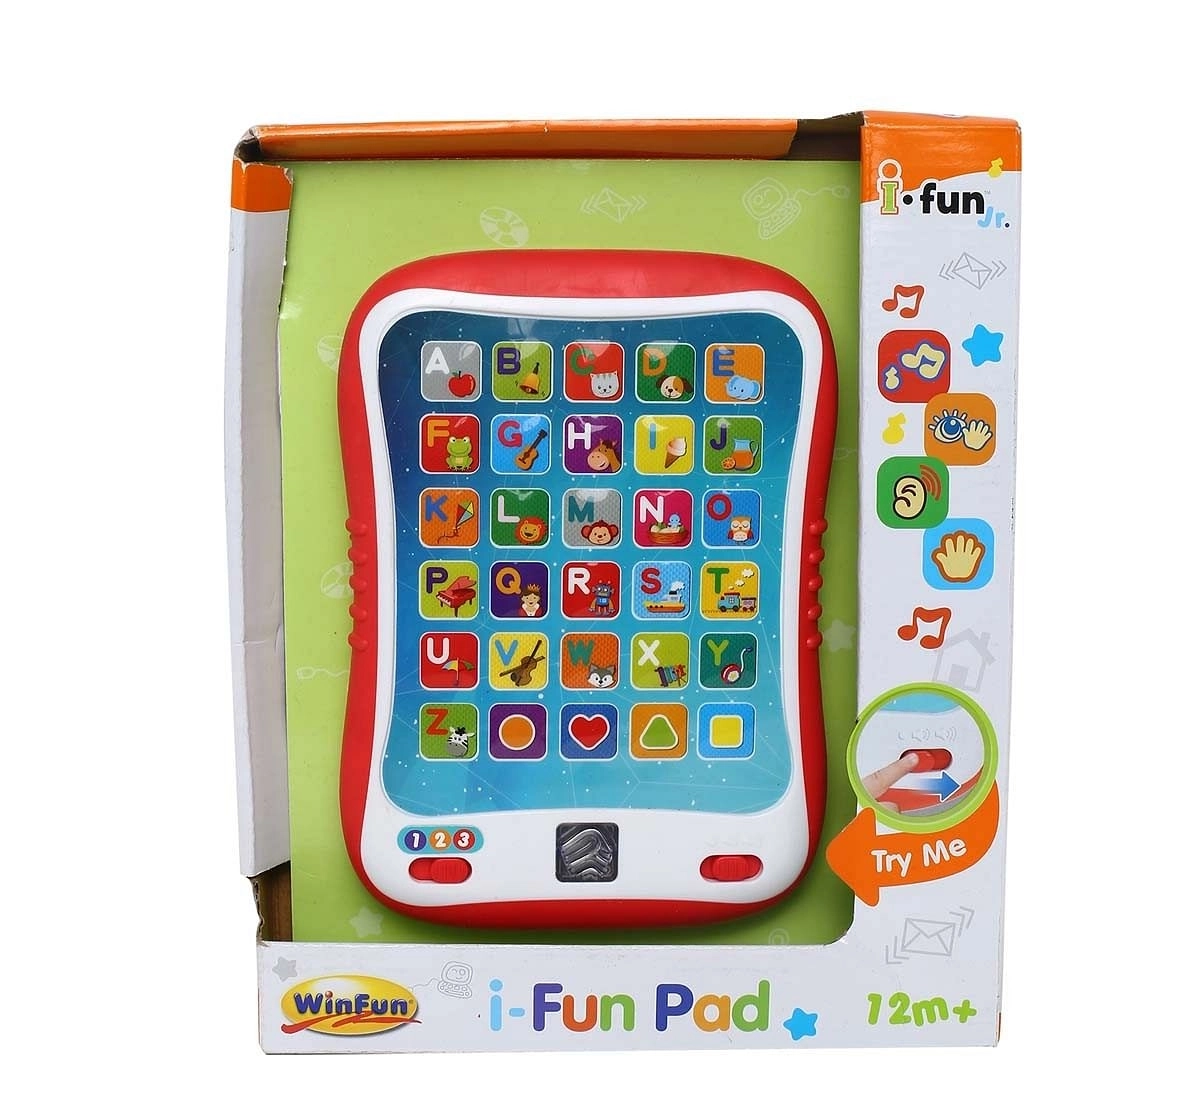 Winfun I Fun Pad, Multi Color Learning Toys for Kids age 12M+ 